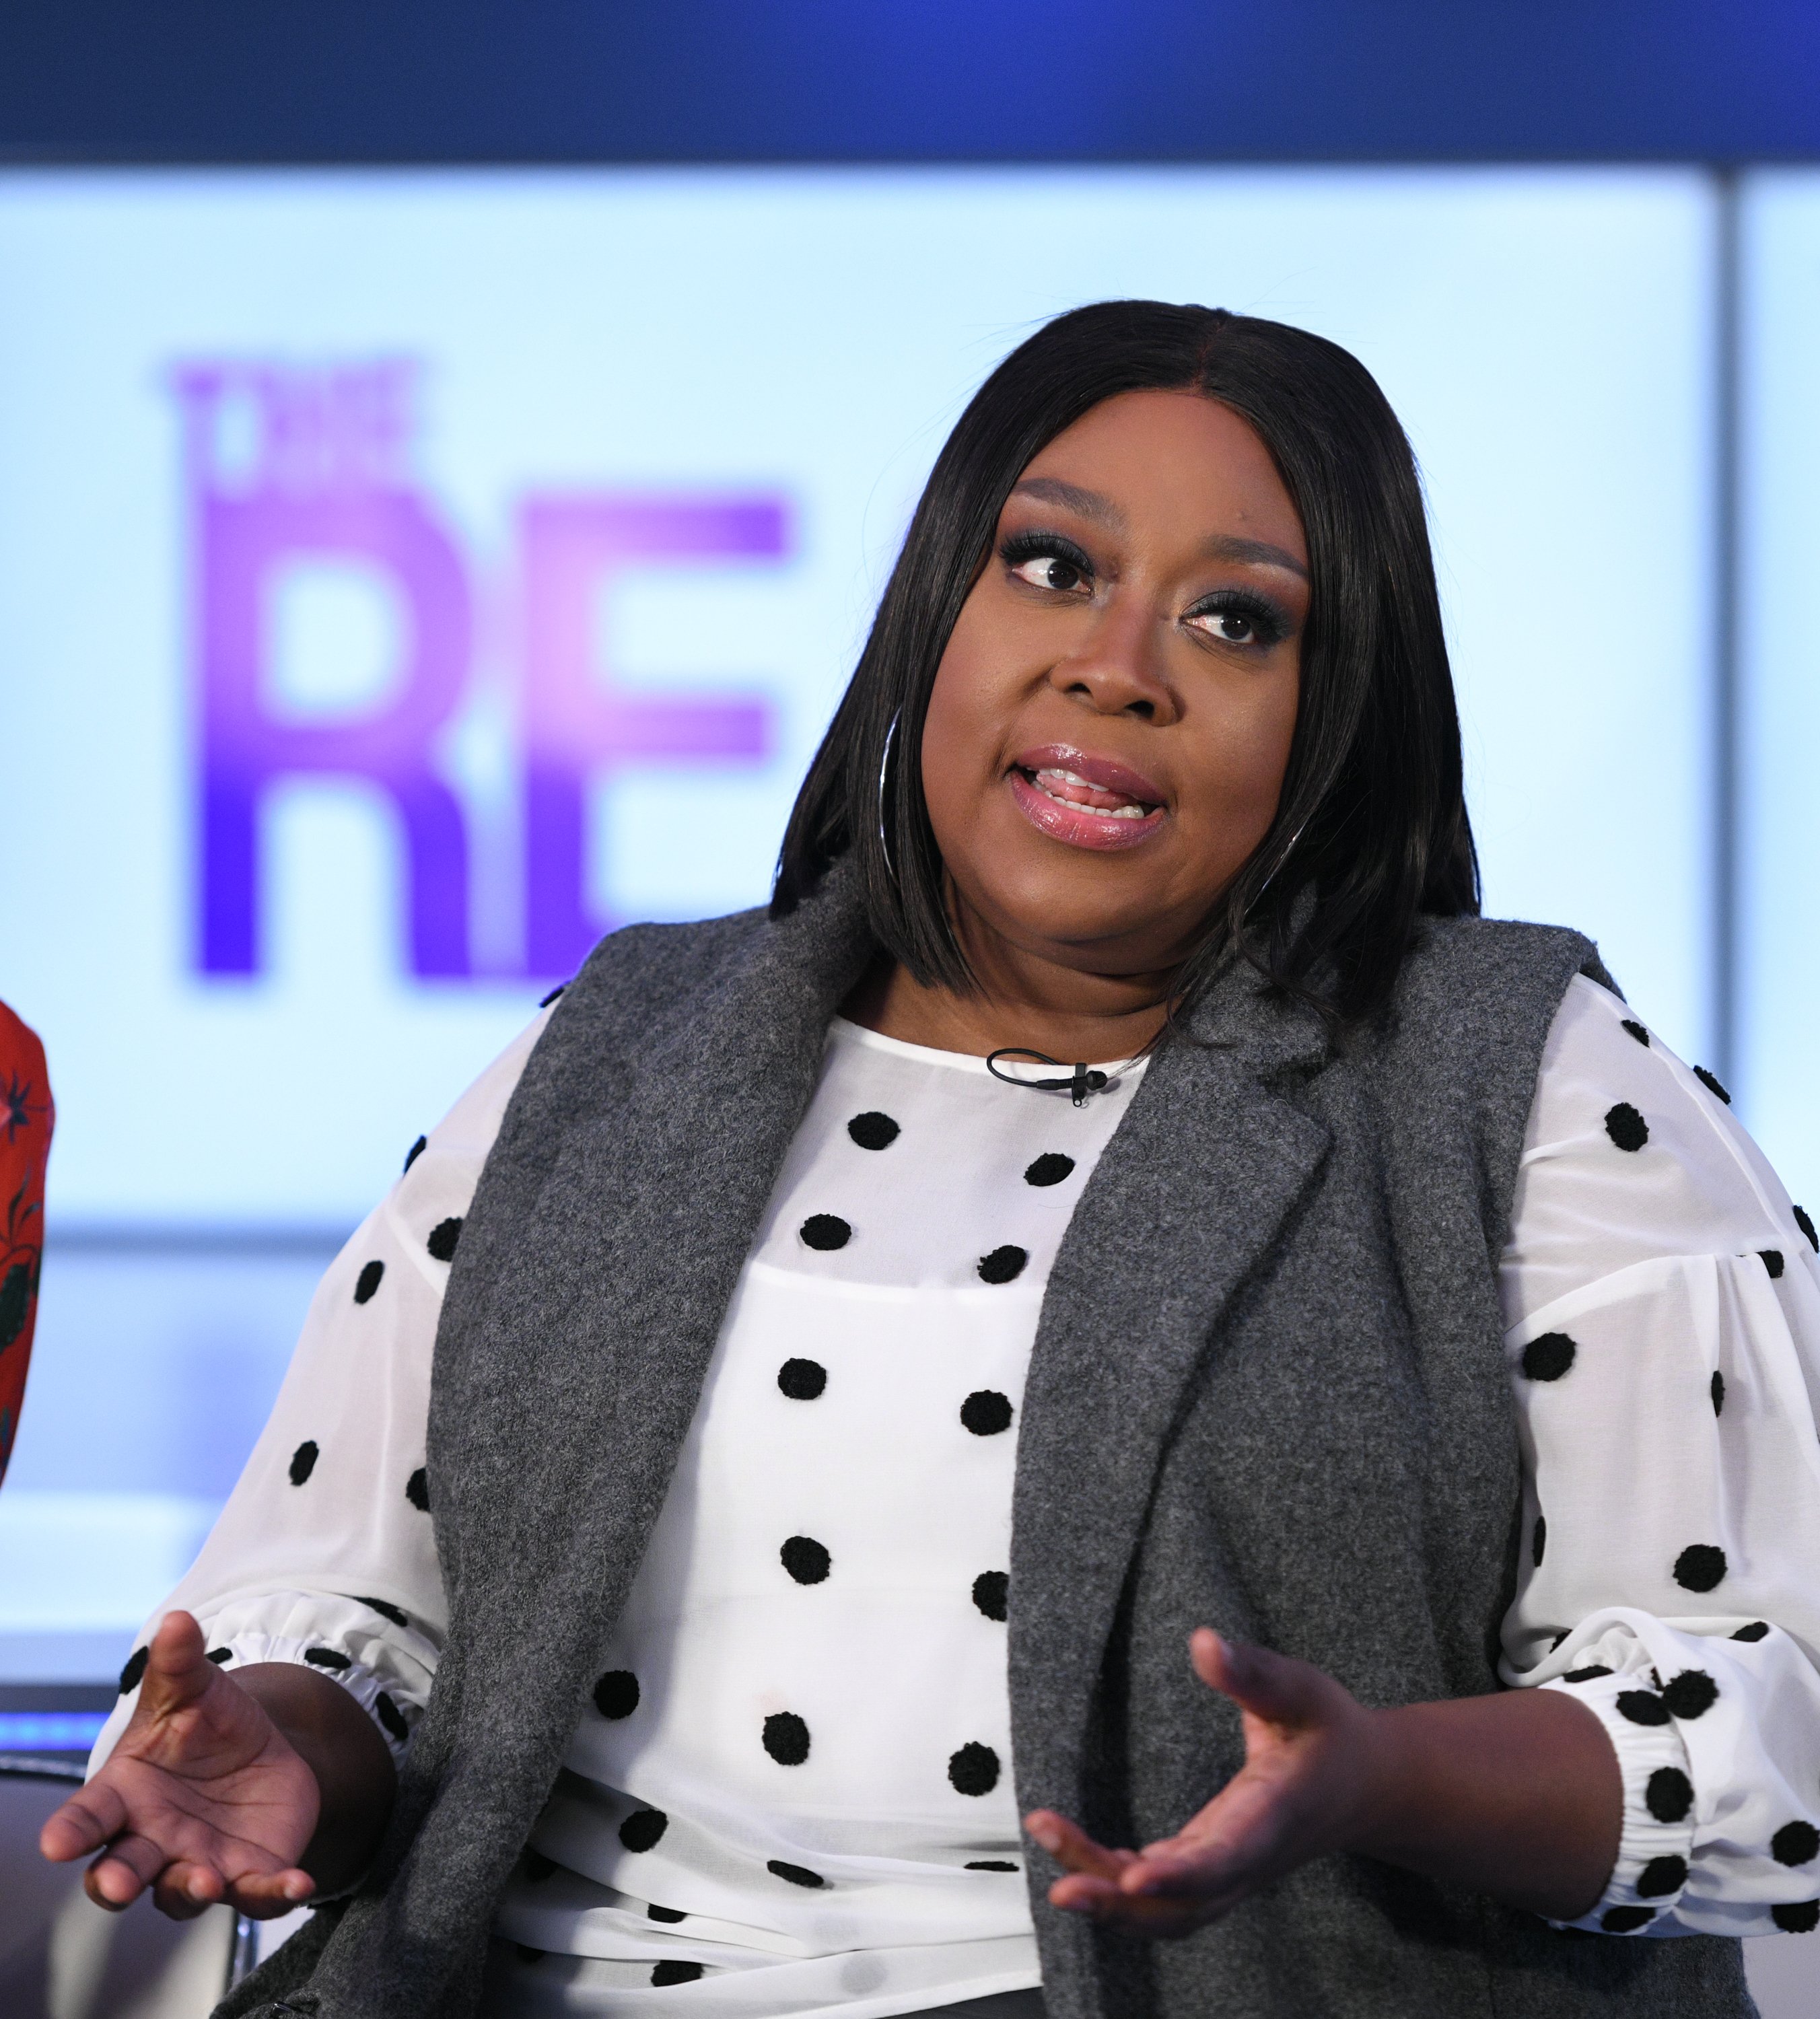 Loni Love at the set of "Extra" in November 2019. | Photo: Getty Images